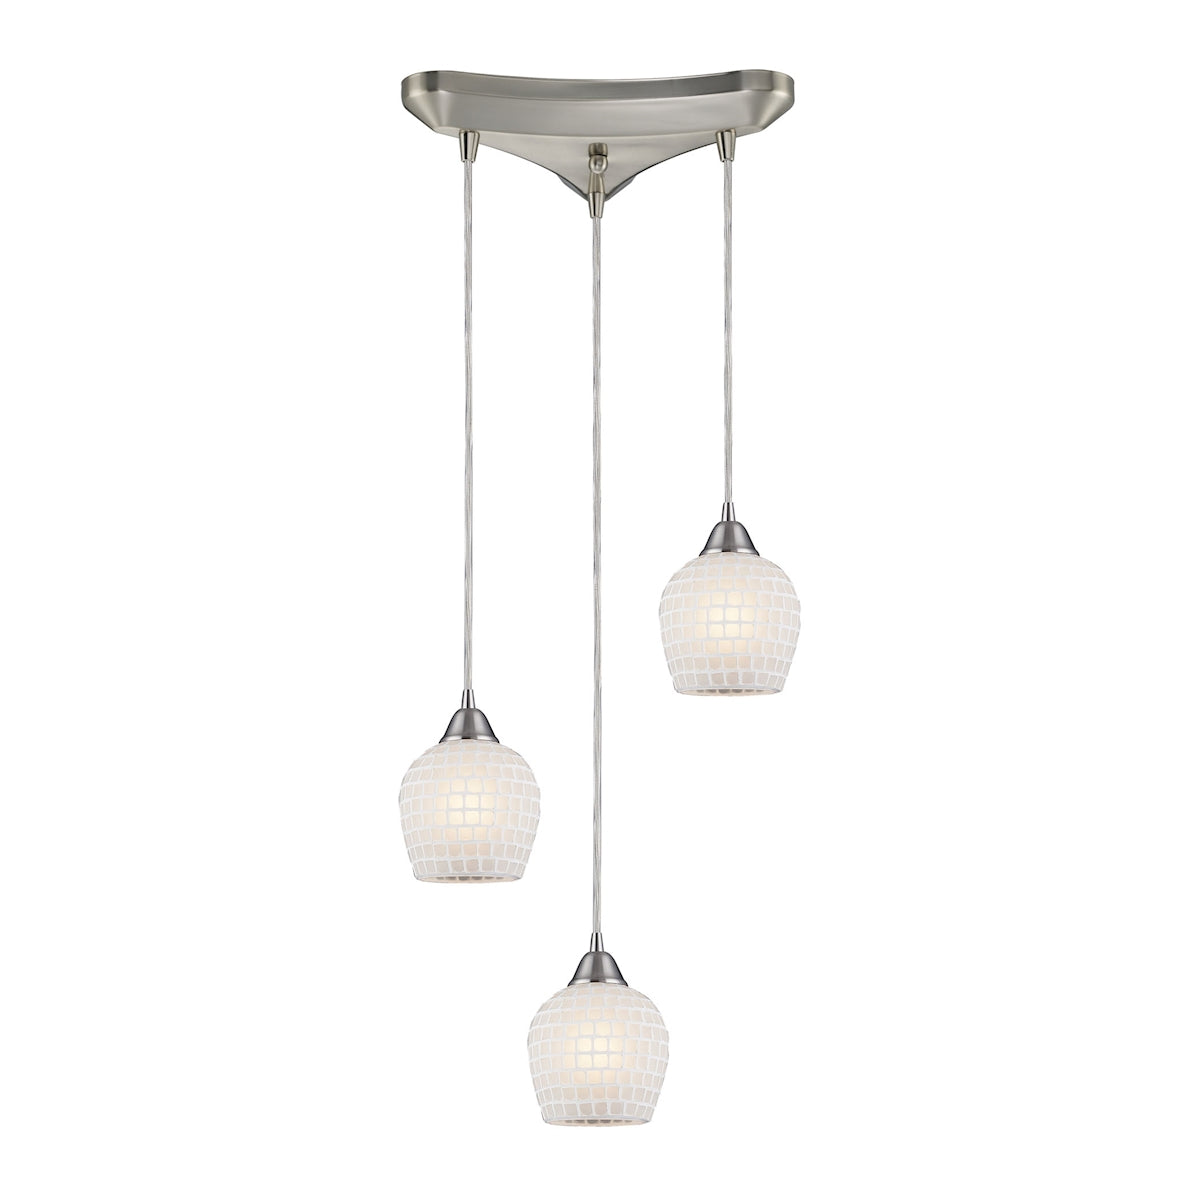 Fusion 3-Light Triangular Pendant Fixture in Satin Nickel with White Mosaic Glass